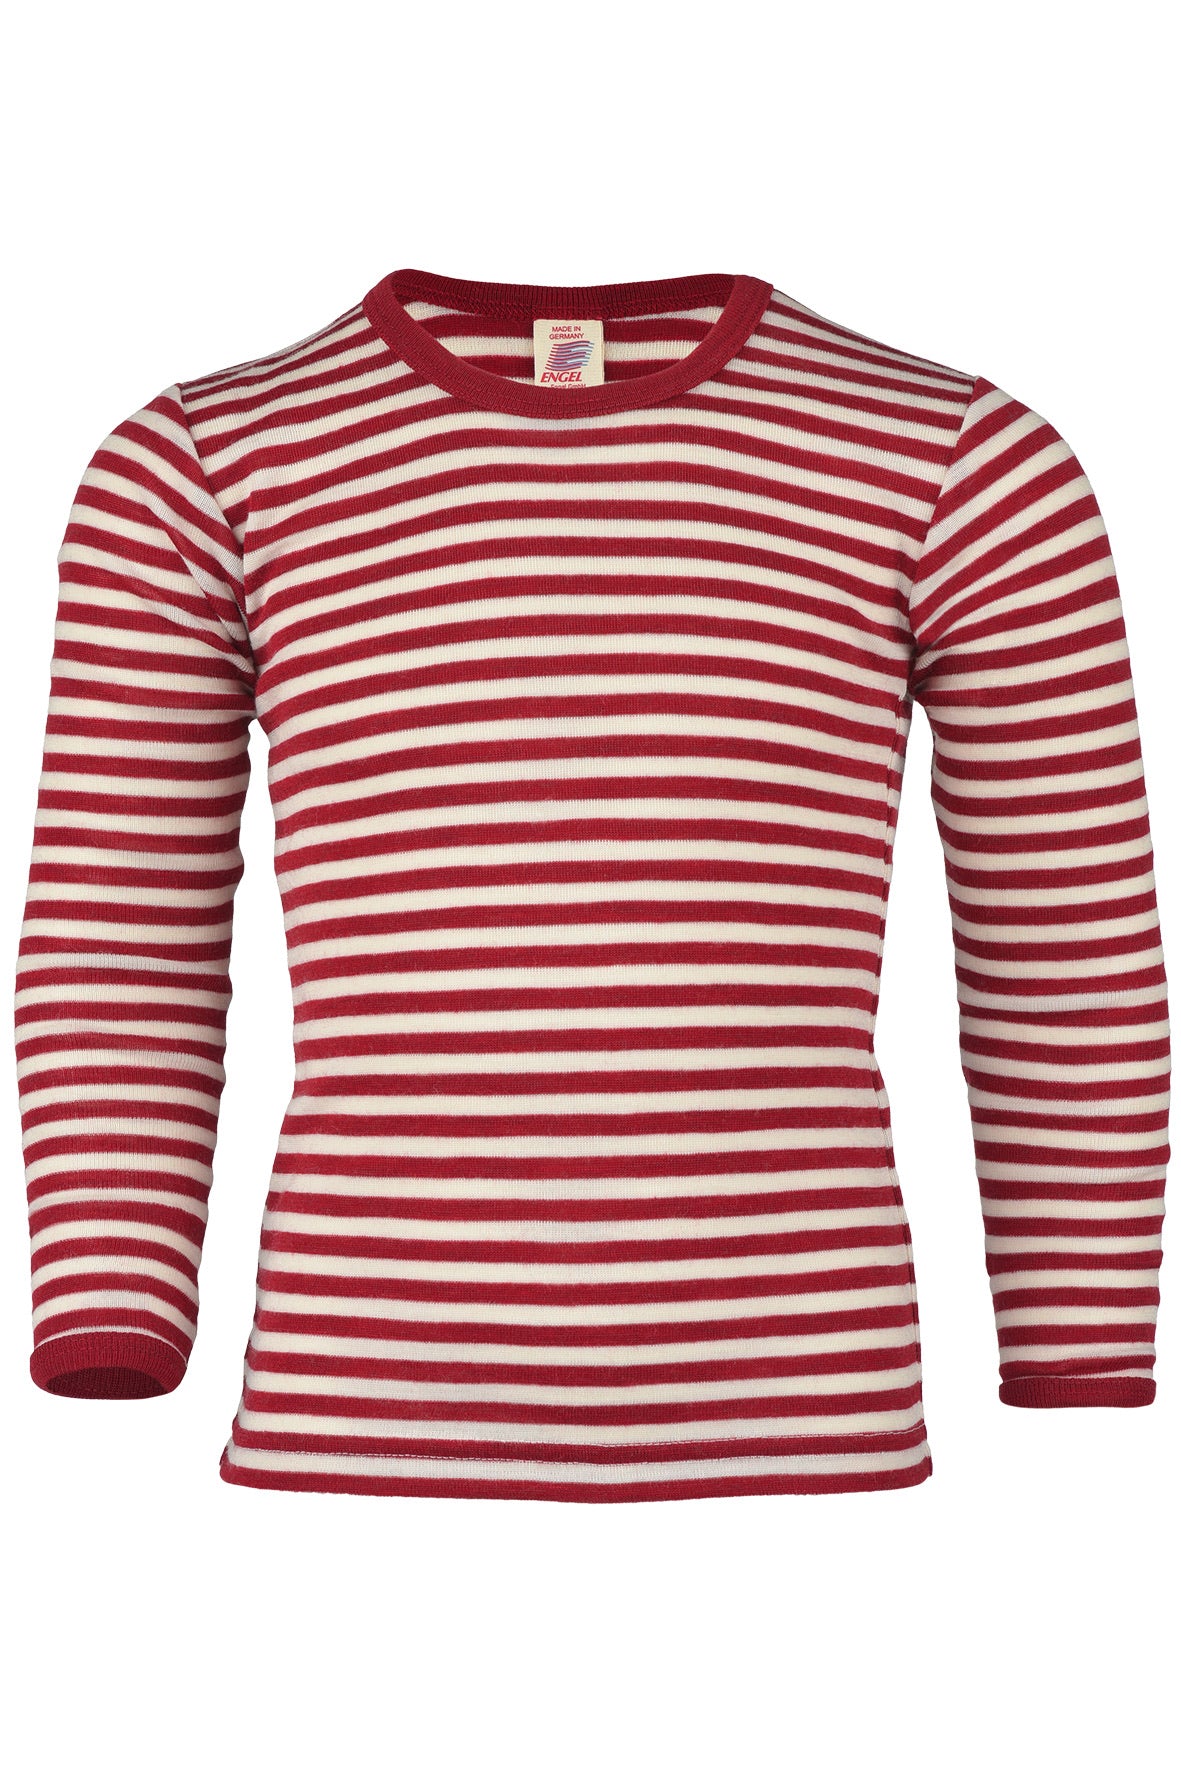 Engel kids thermal layer made of 100% wool in red-natural stripe.